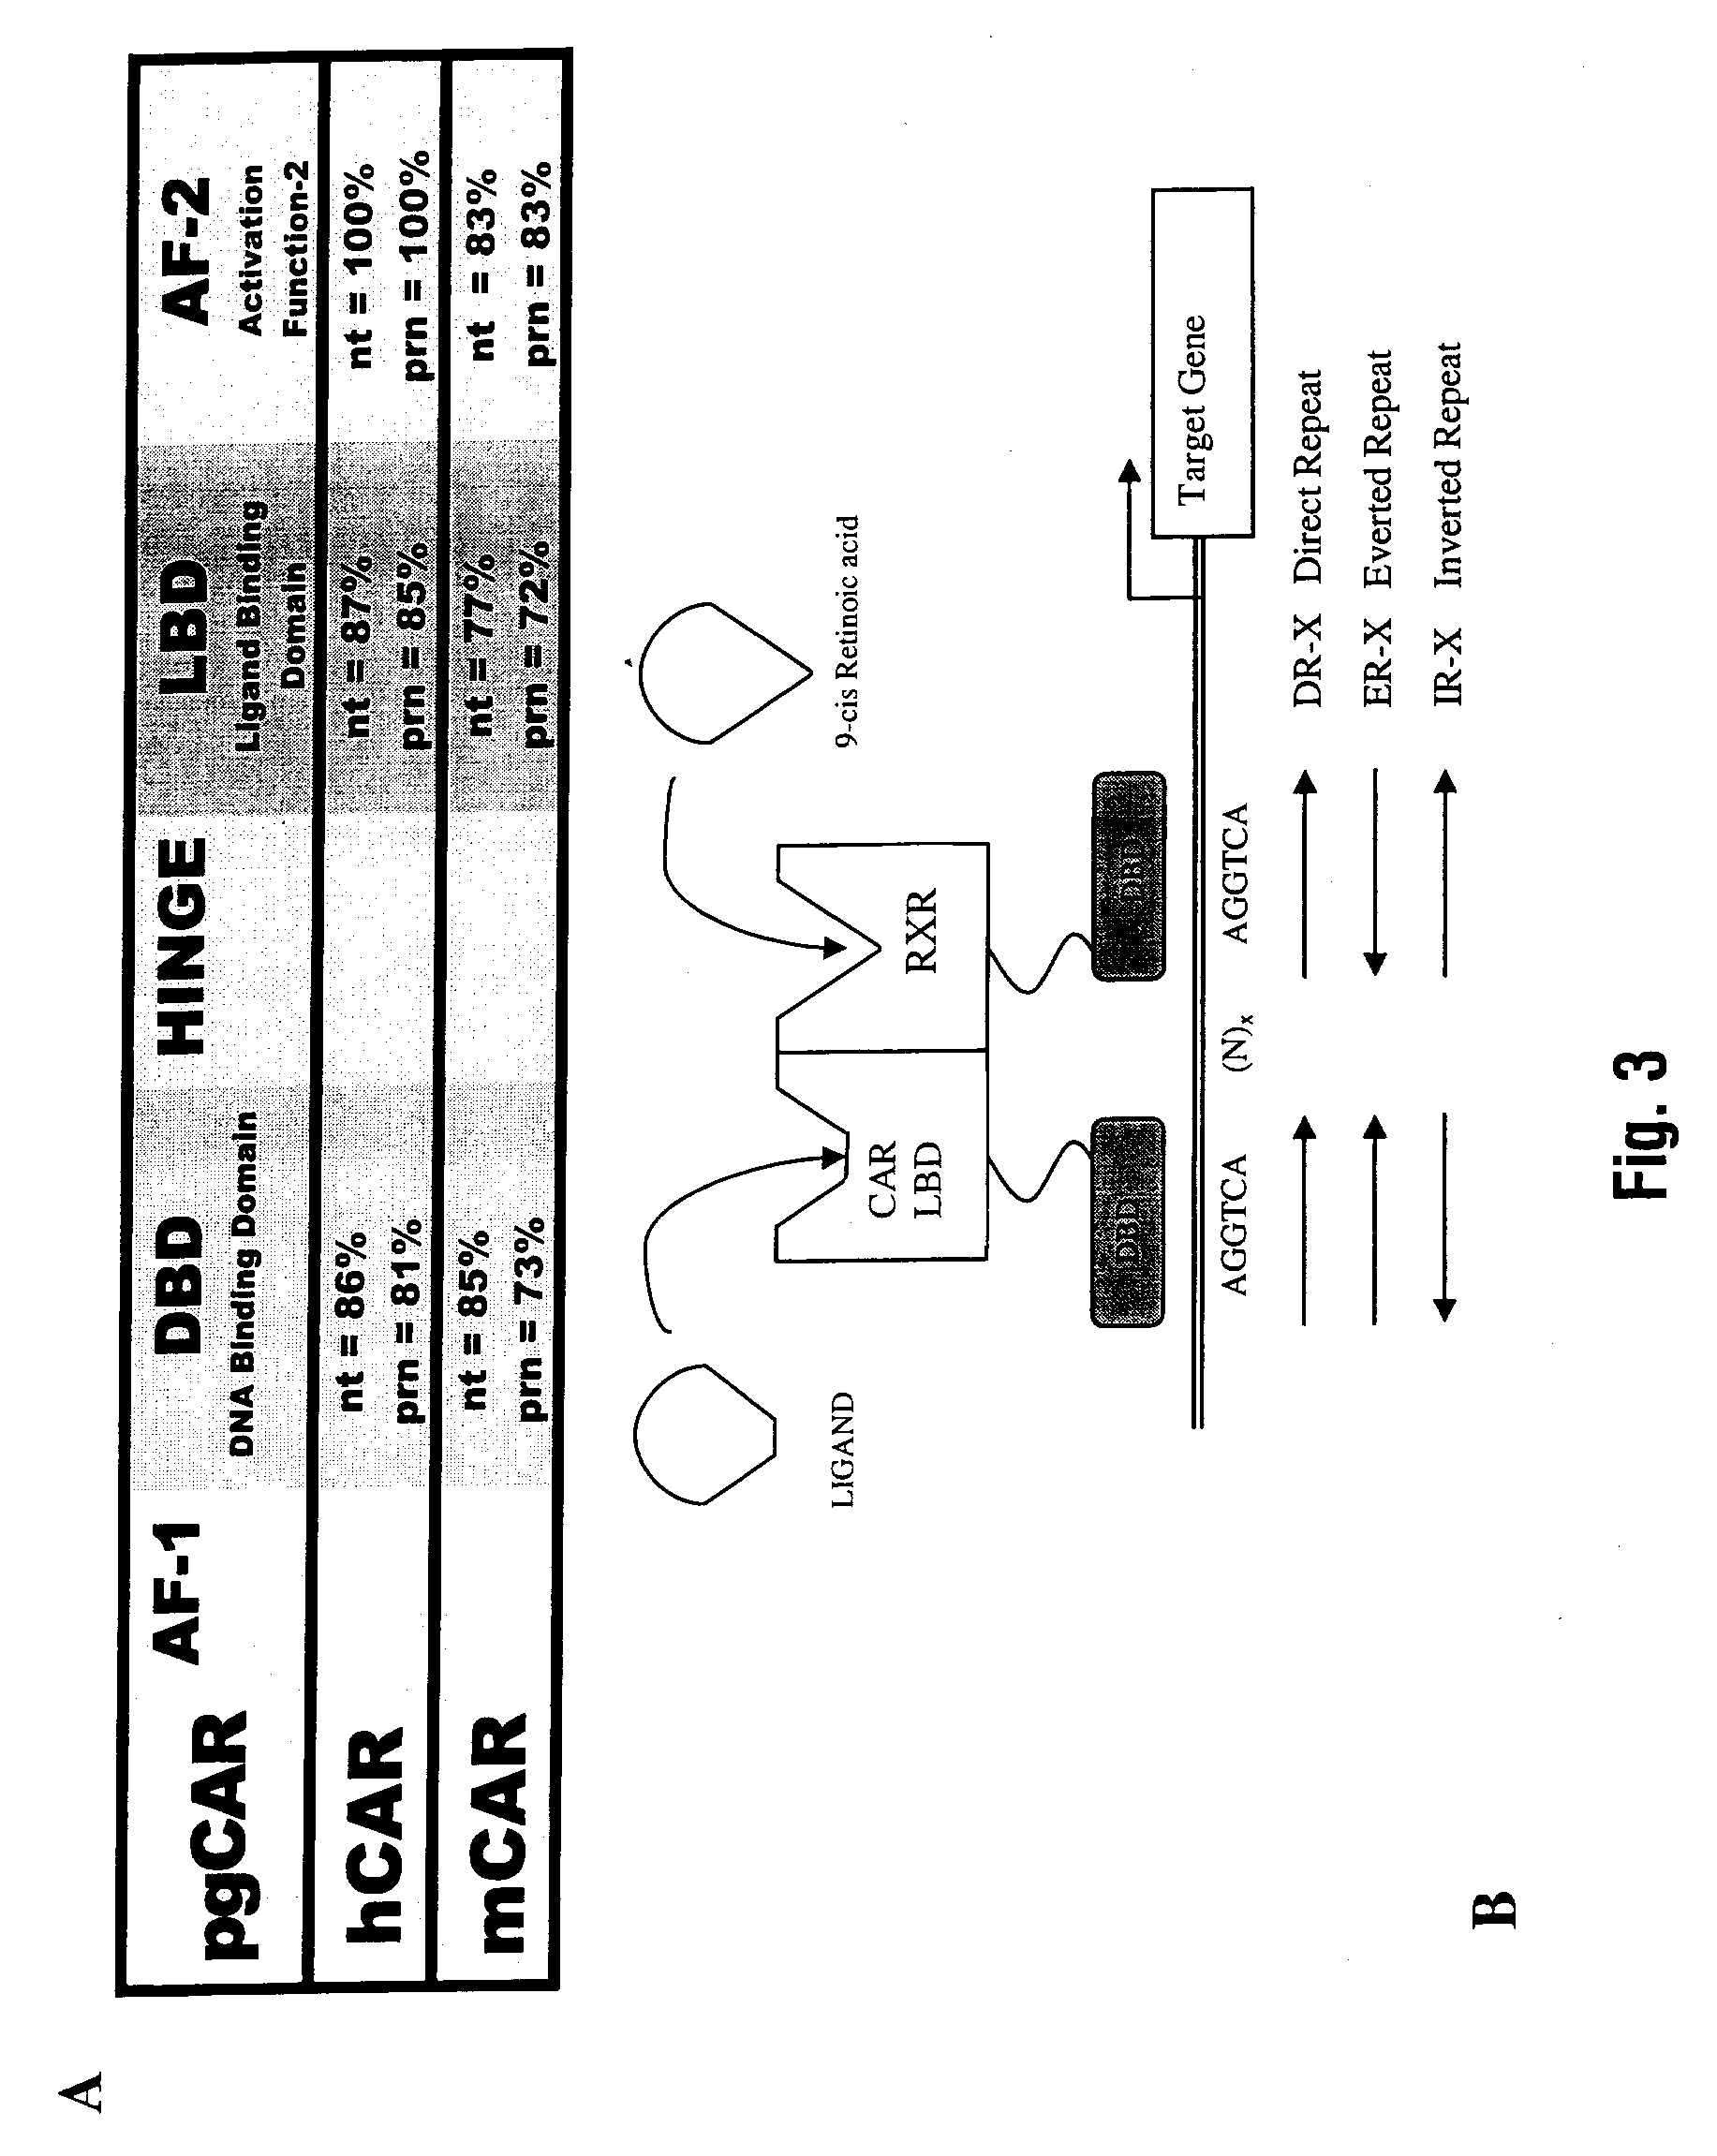 Method of detecting and reducing boar taint using nuclear receptors